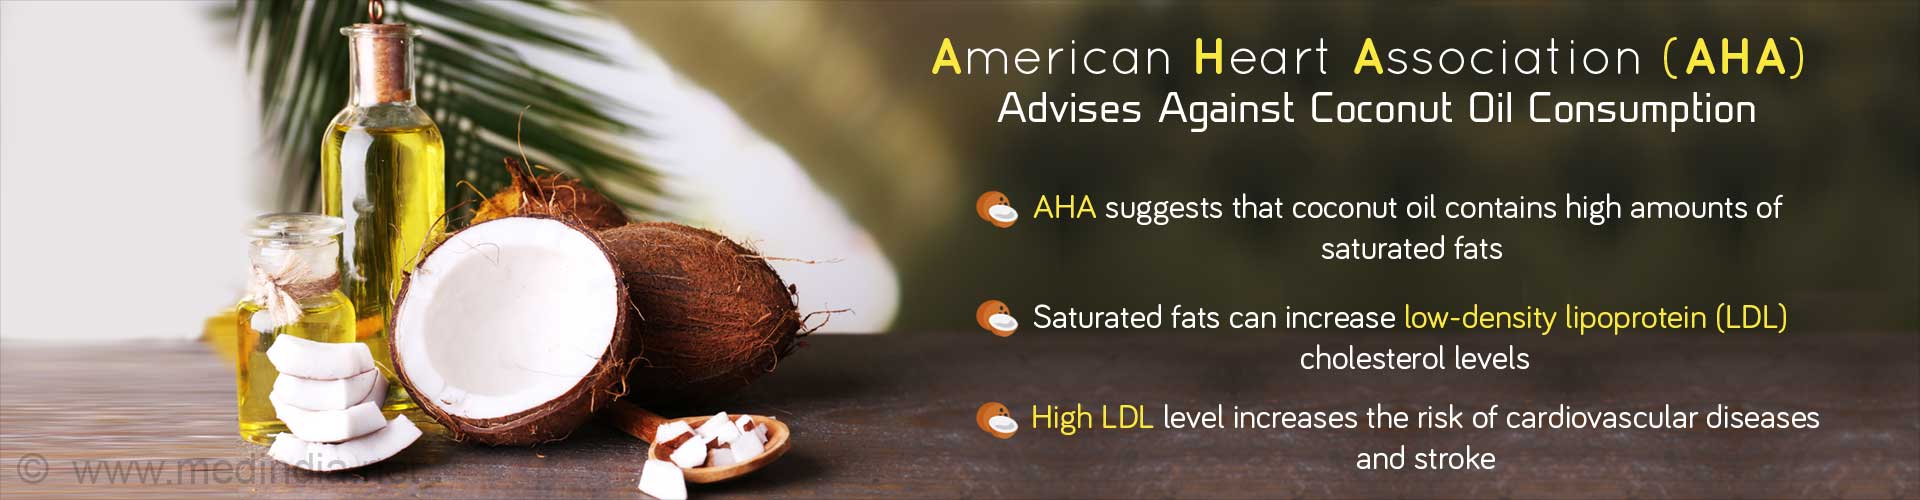 American Heart Association (AHA),  Advises Against Coconut Oil Consumption
- AHA suggests that coconut oil contains high amounts of saturated fats
- Saturated fats can increase low-density lipoprotein (LDL)
- High (LDL) level increases the risk of cardiovascular disease and stroke